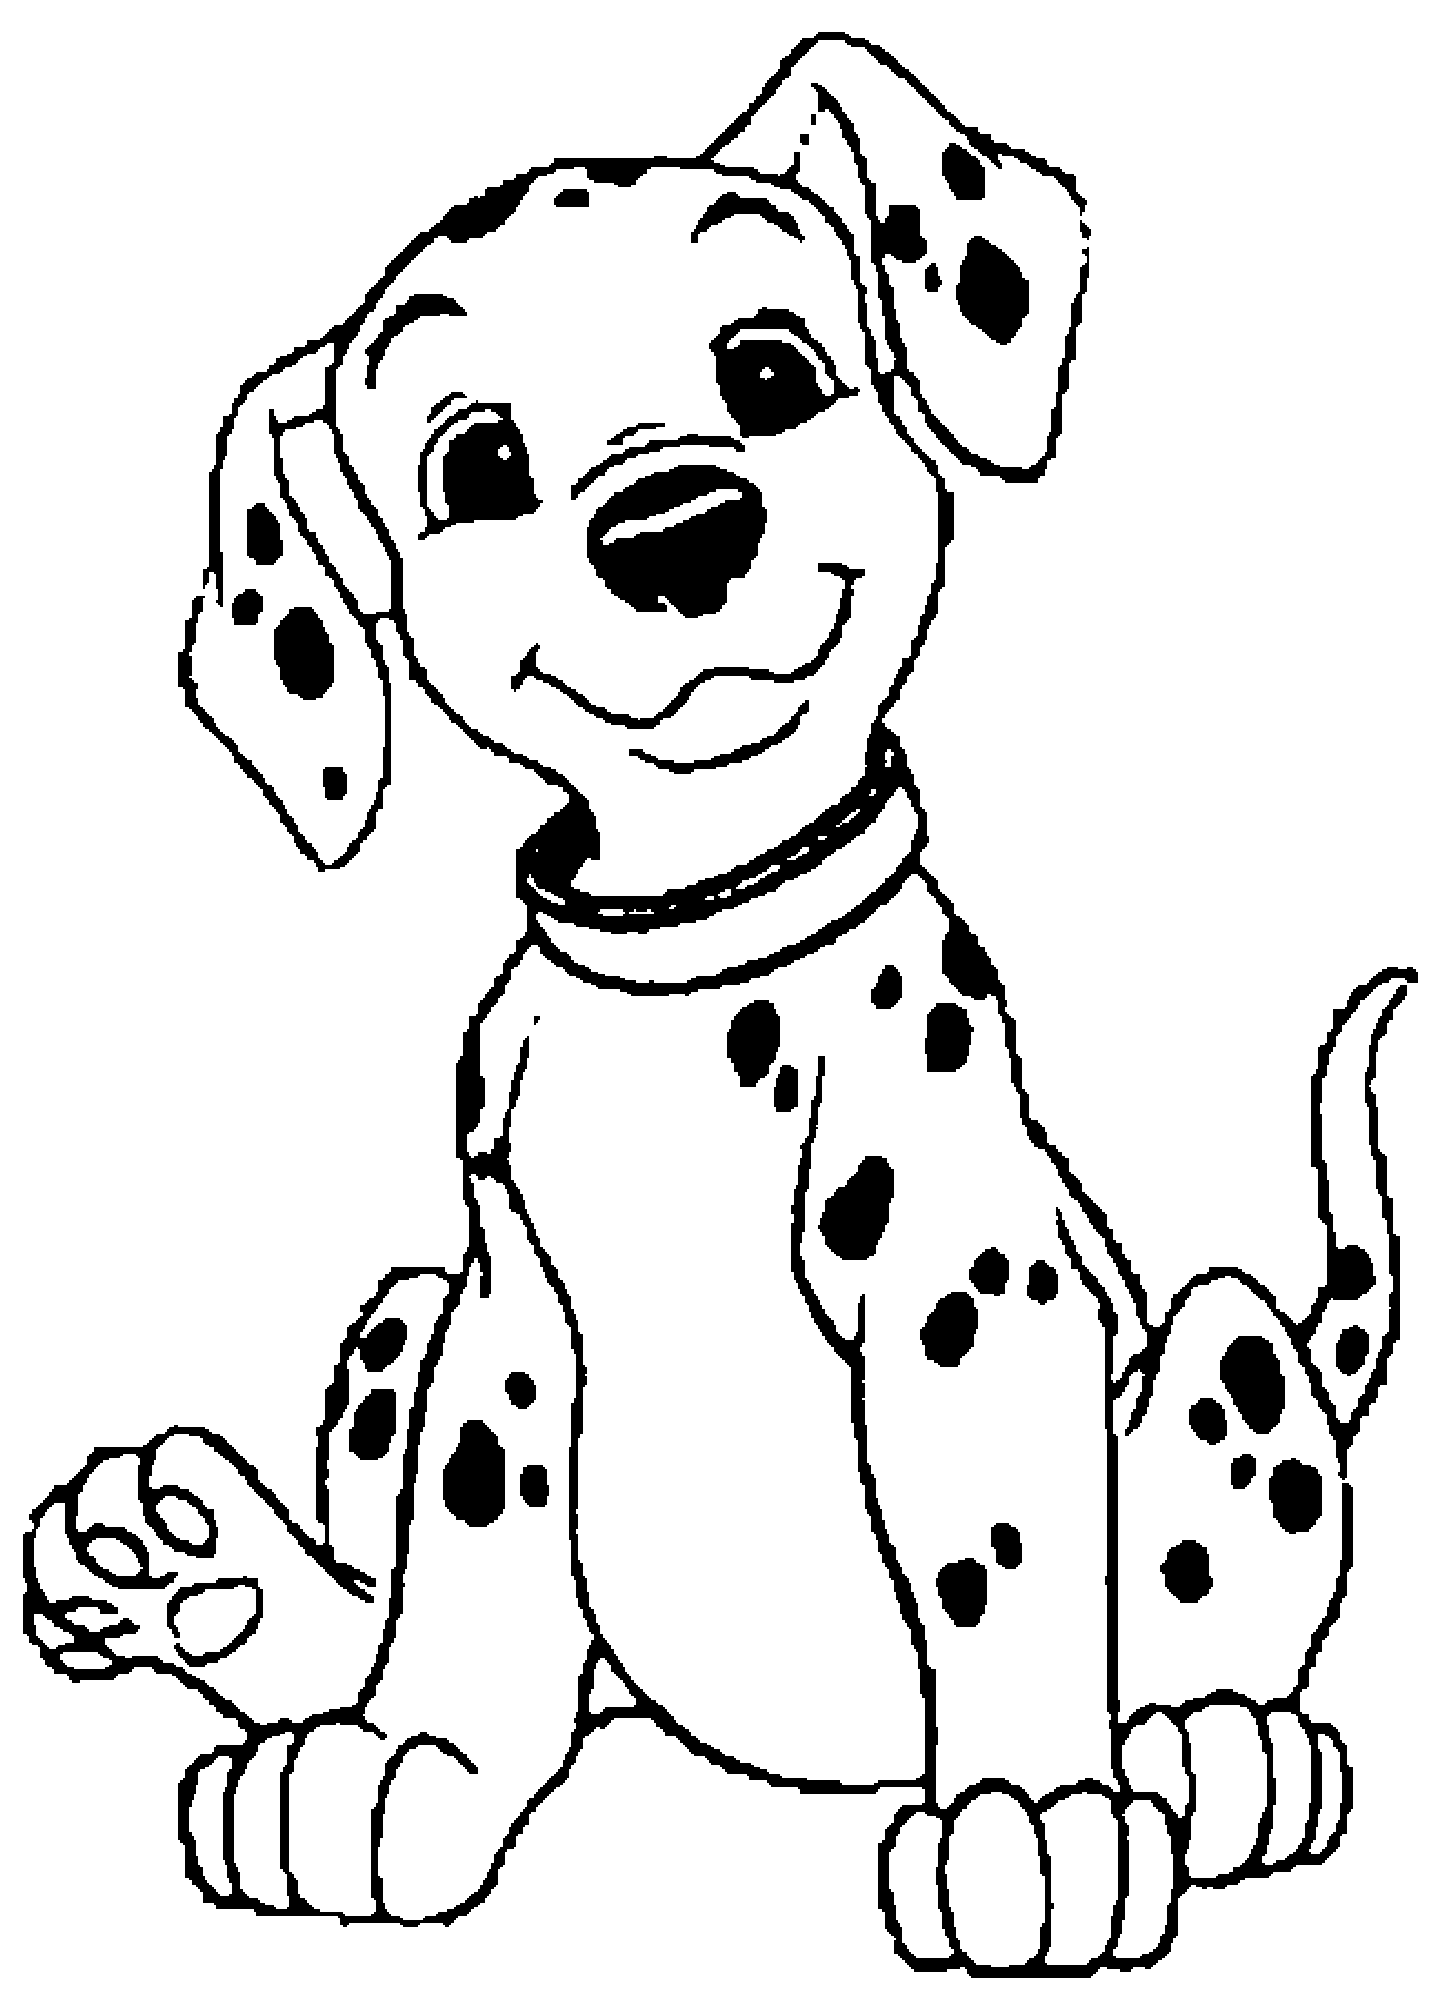 101 Dalmatians #129193 (Animation Movies) Free Printable Coloring Pages